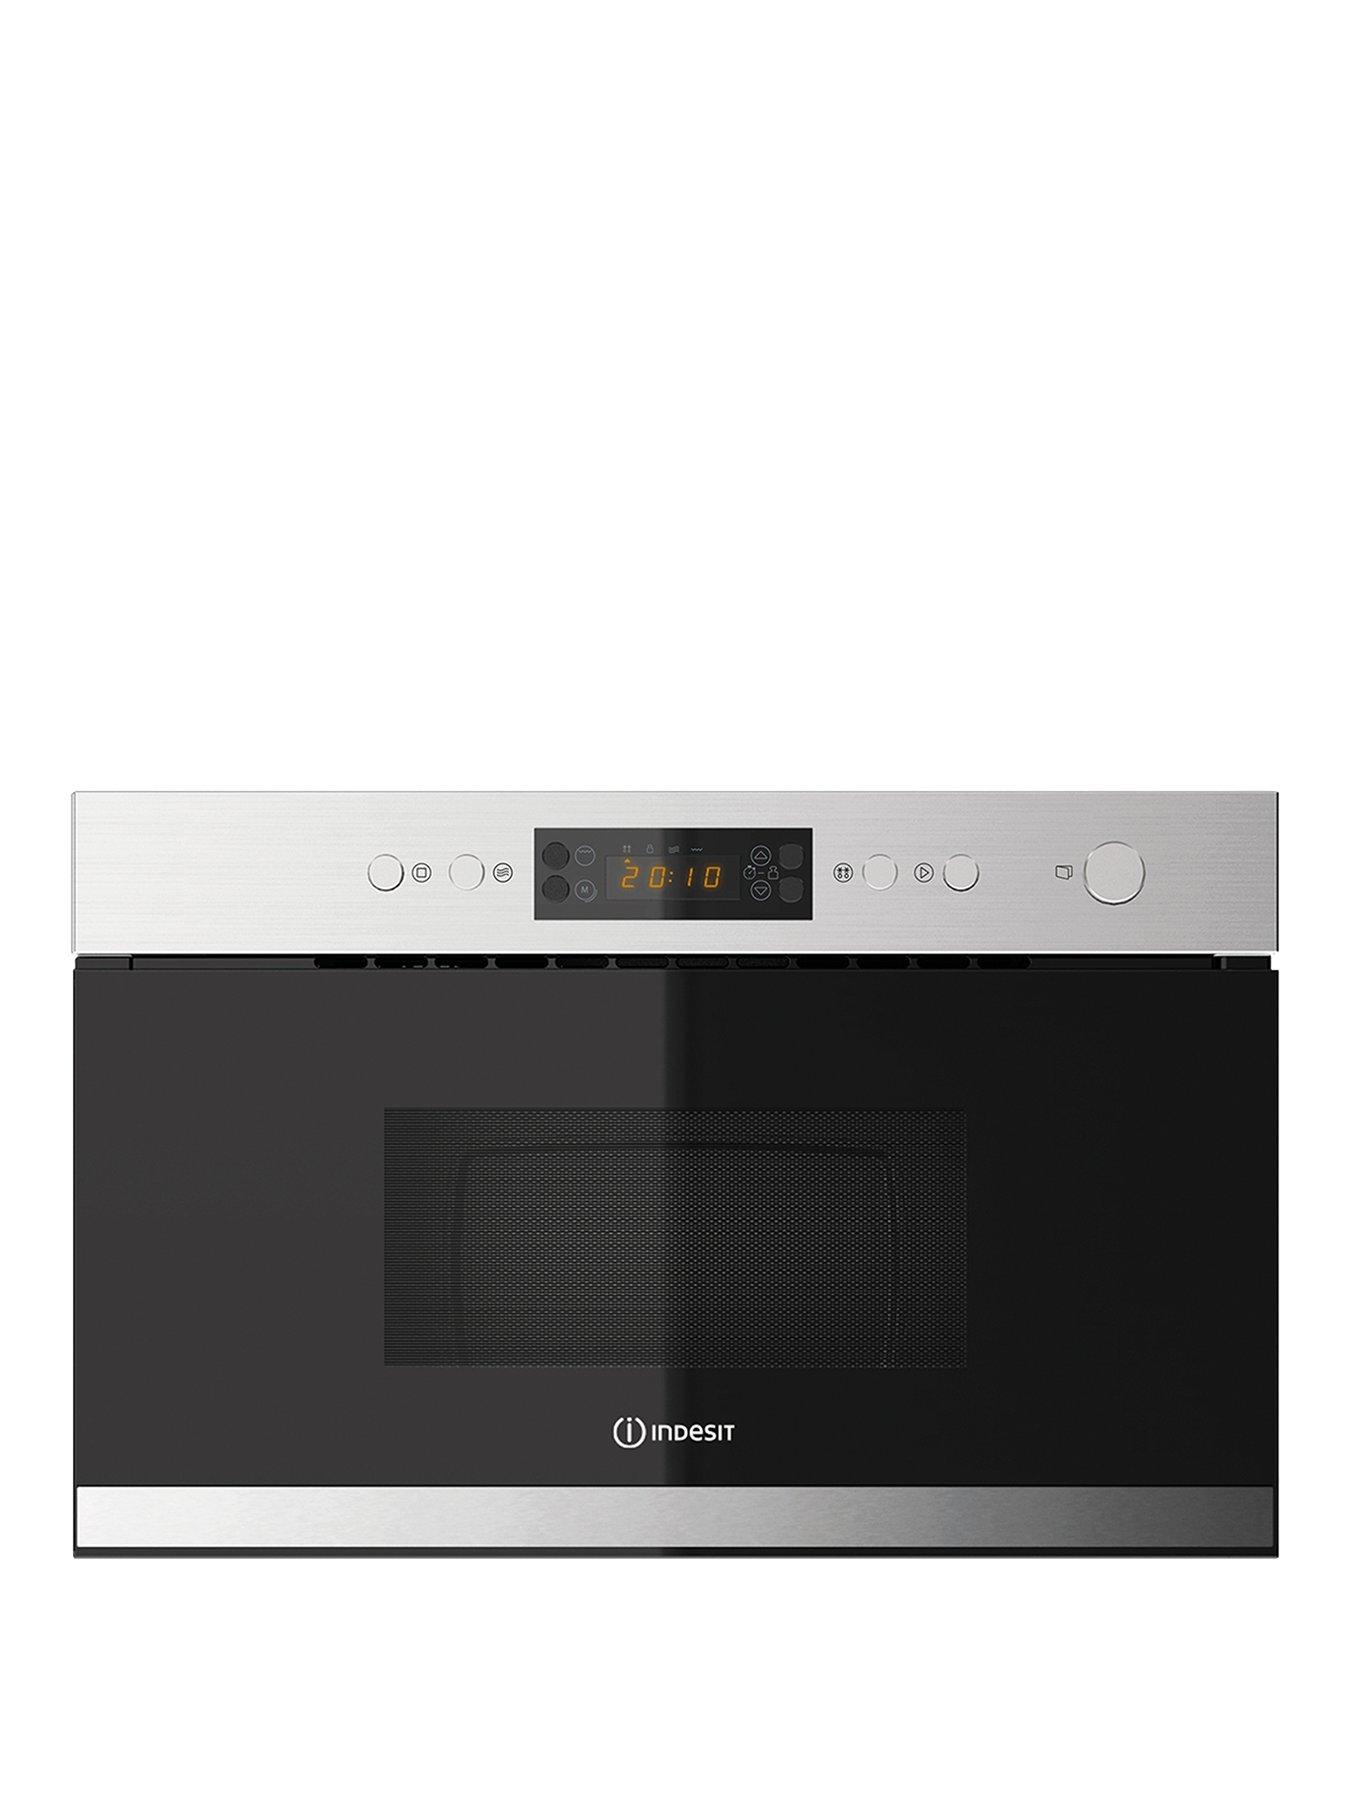 Indesit Aria Mwi3213Ix Built-In Microwave With Grill And Optional Installation – Stainless Steel – Microwave Only